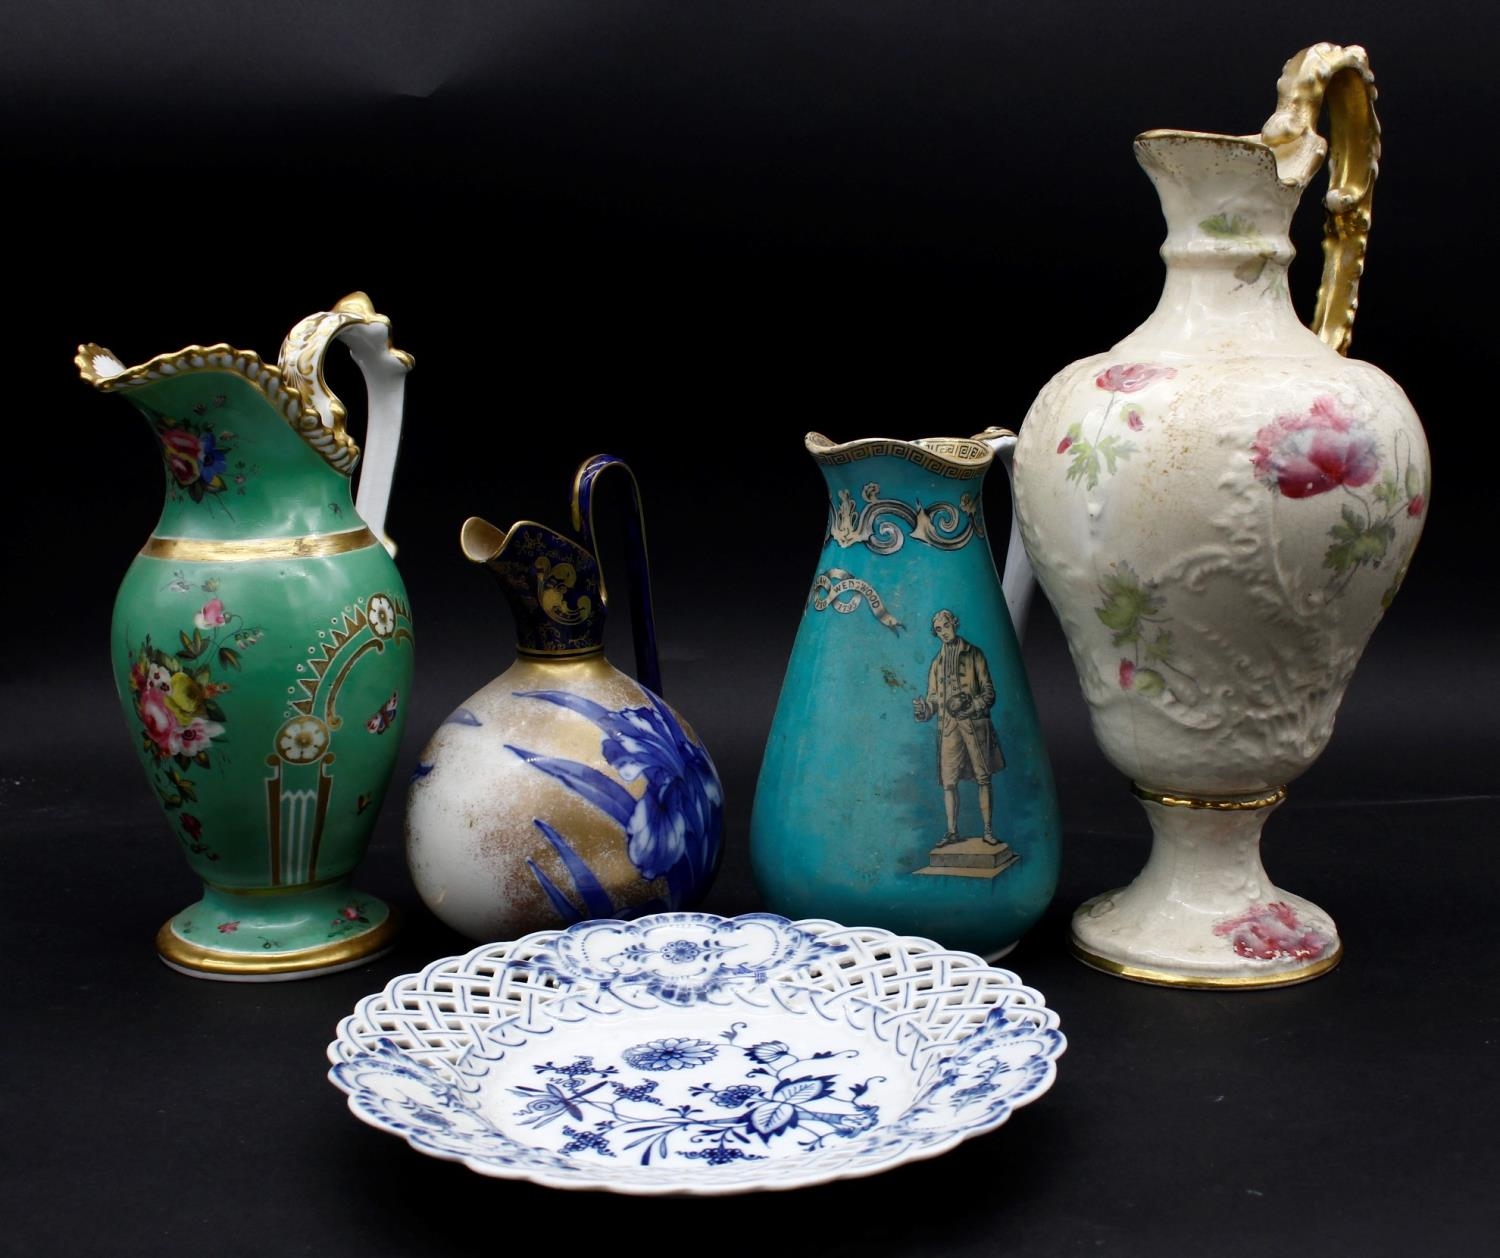 A 19th century Doulton Burslem ewer with gilt and lily decoration, three other examples and a 19th